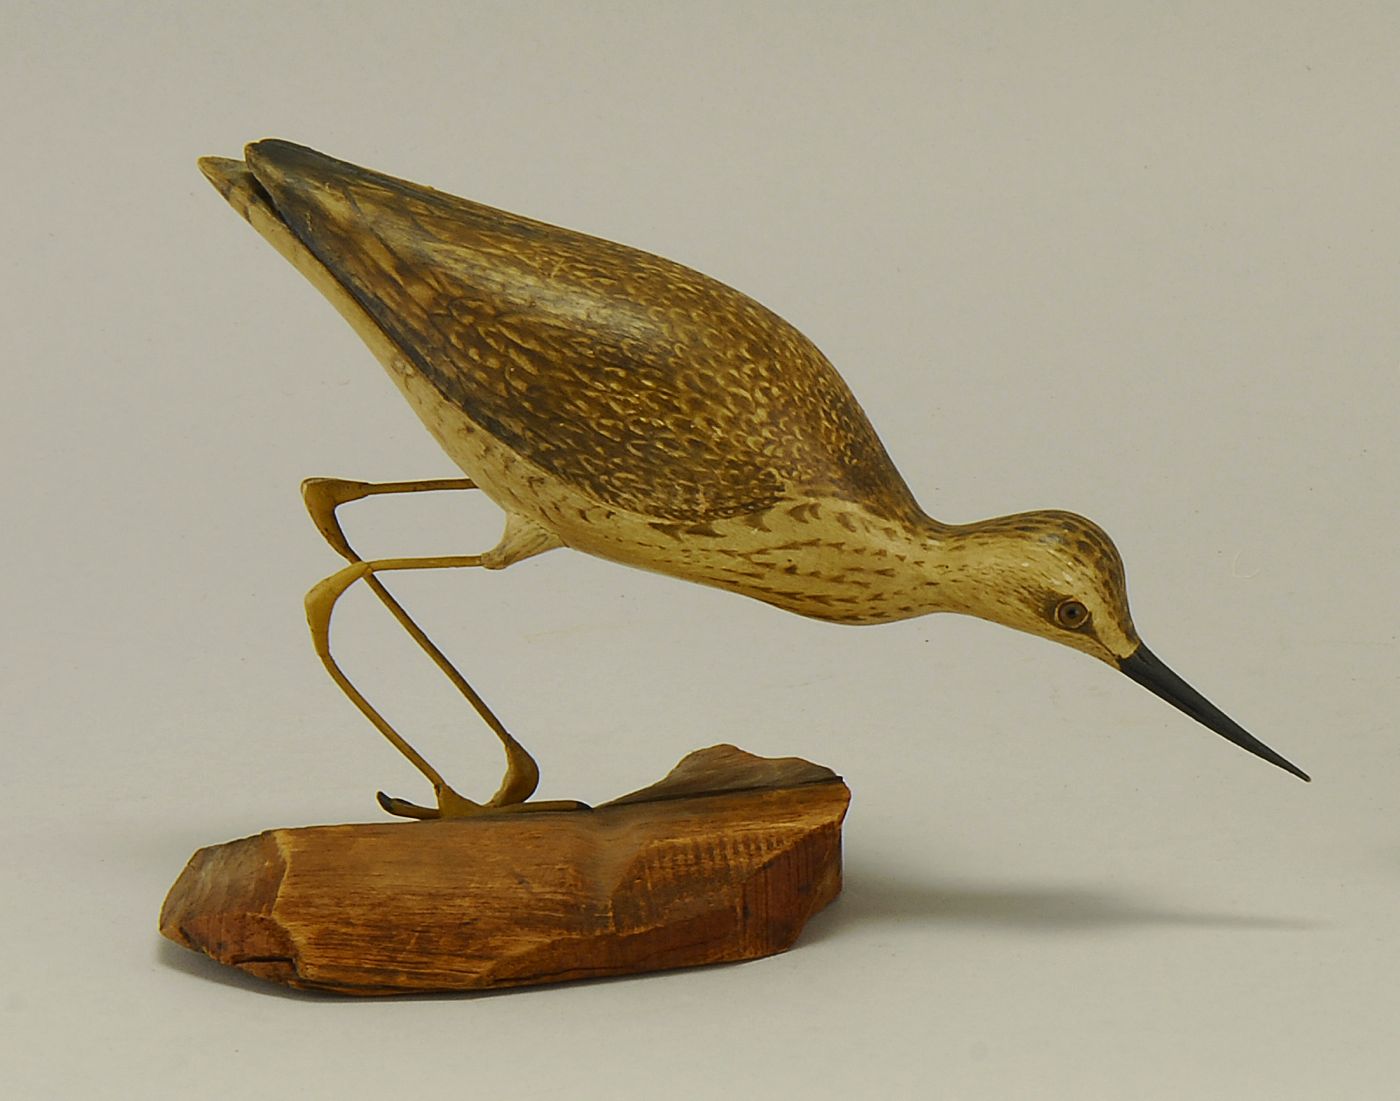 EARLY DECORATIVE YELLOWLEGS CARVINGFrom 14a76f